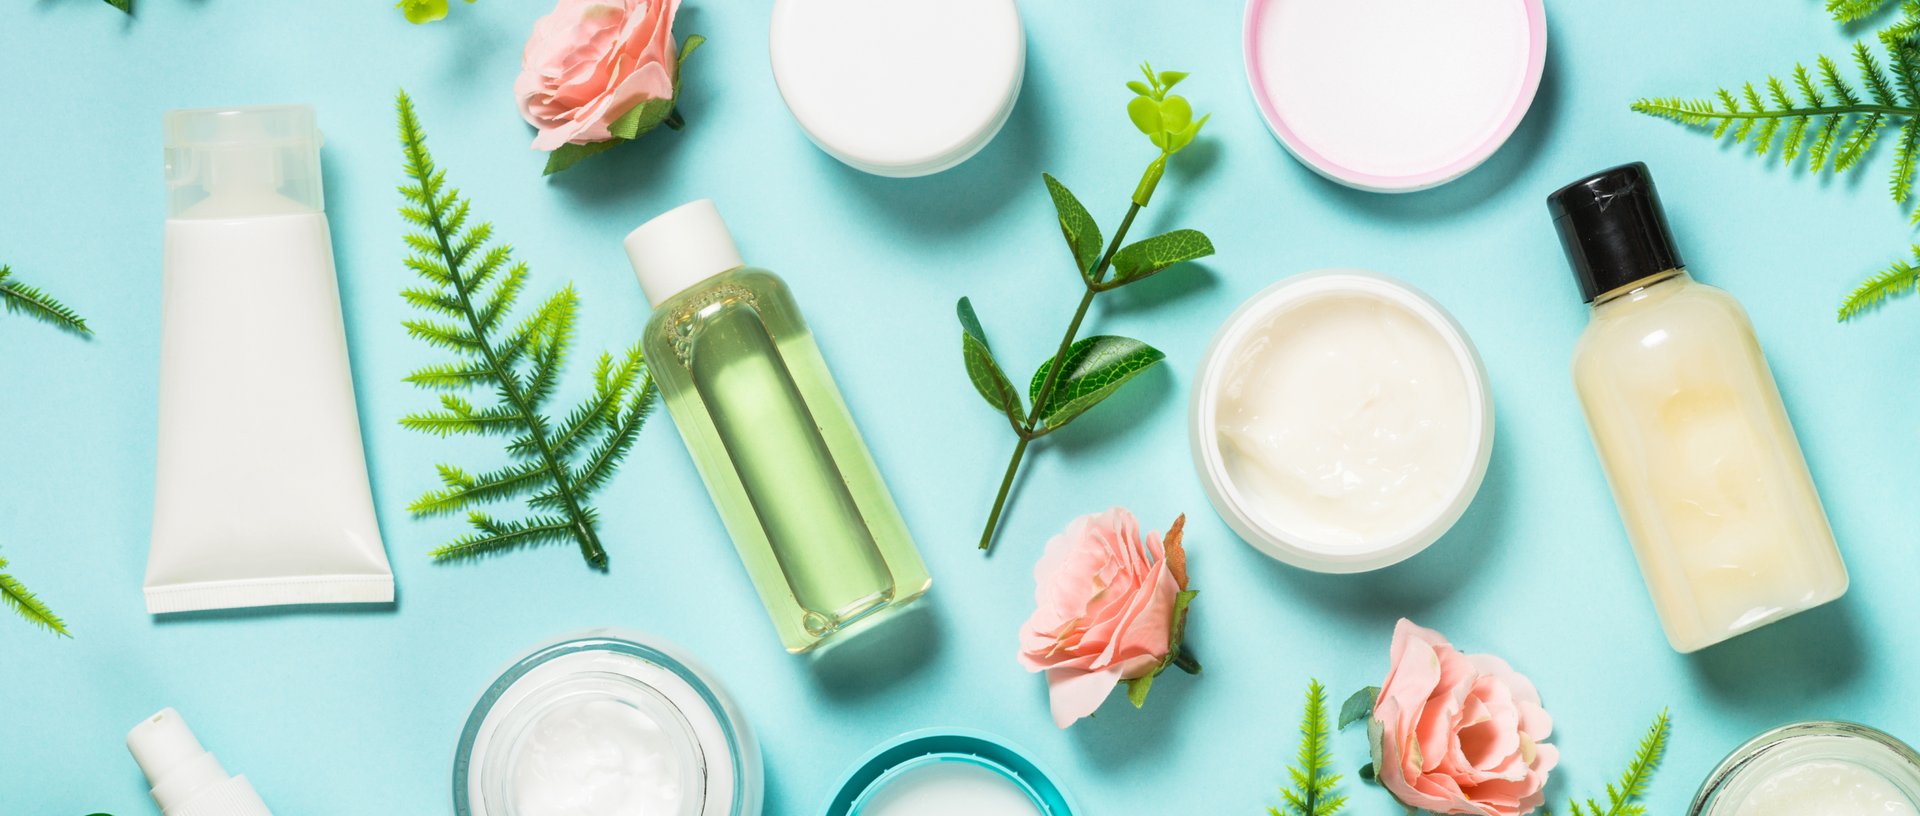 White creams and small clear plastic bottles containing clear and creamy liquid amongst pink rose heads and snippets of ferns on a teal background